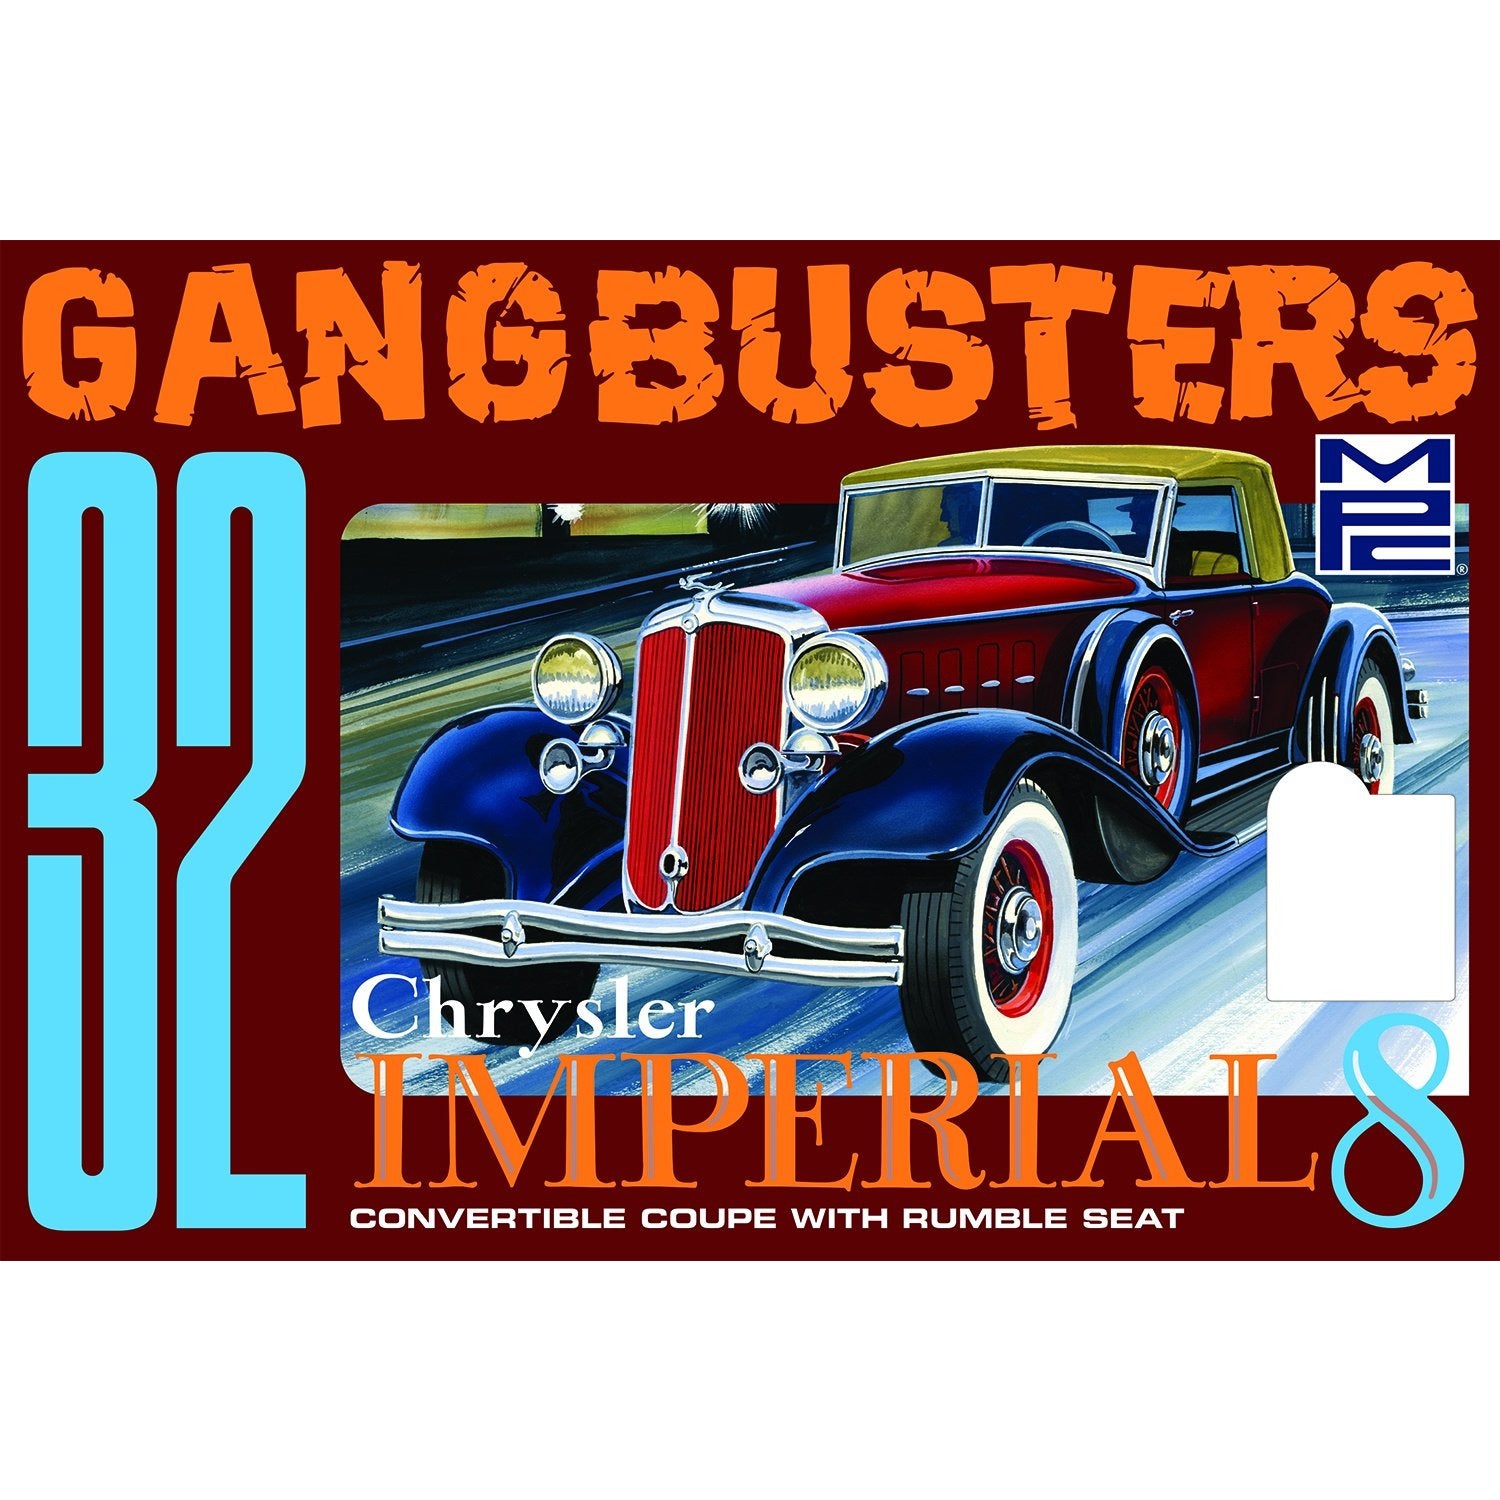 1932 Gangbusters Chrysler Imperial 8 Convertible Coupe w/Rumble Seat 1/25 Model Car Kit #926 by MPC